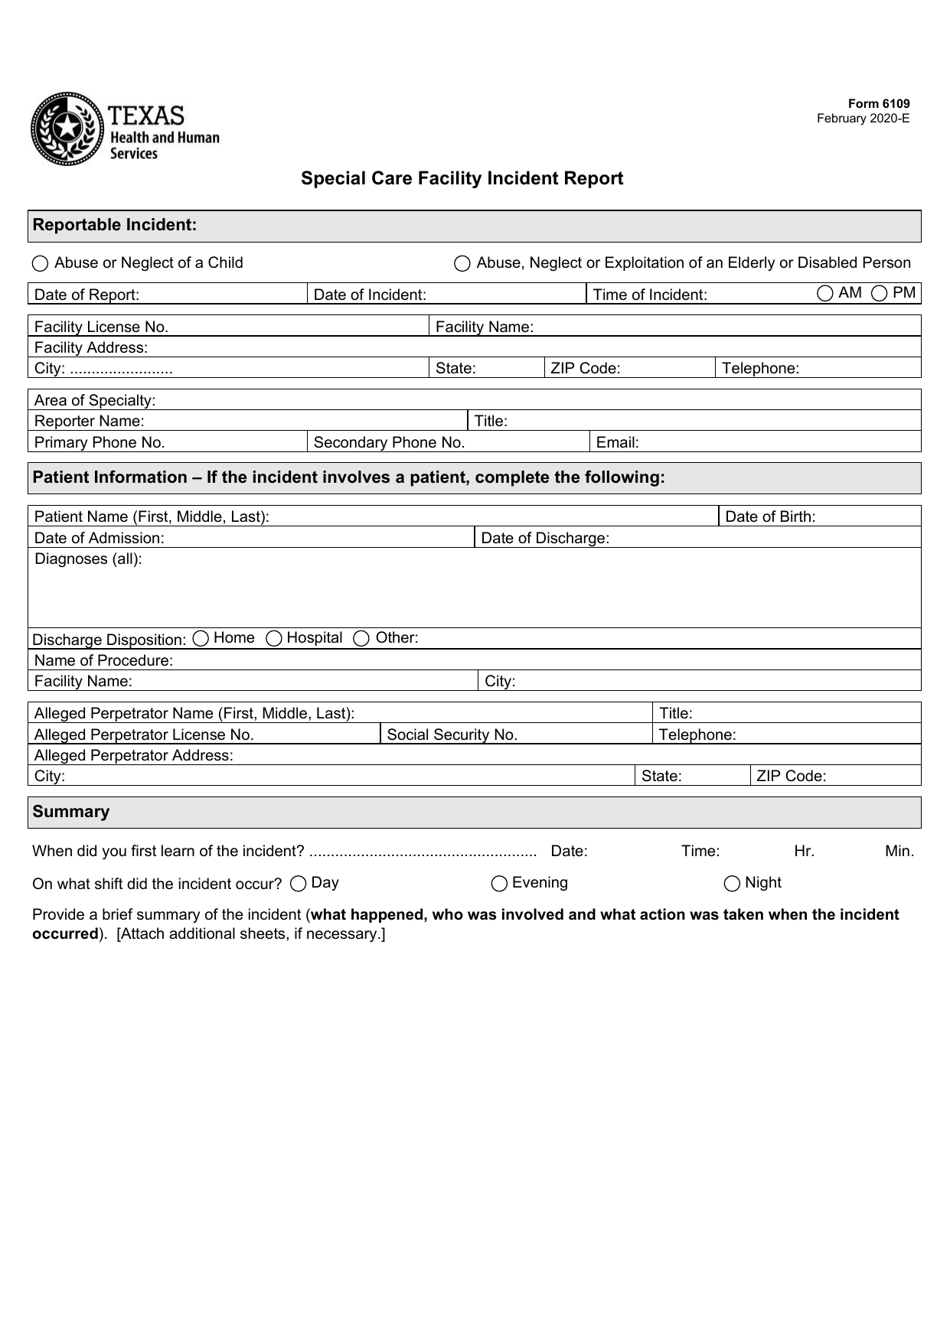 Form 6109 Special Care Facility Incident Report - Texas, Page 1